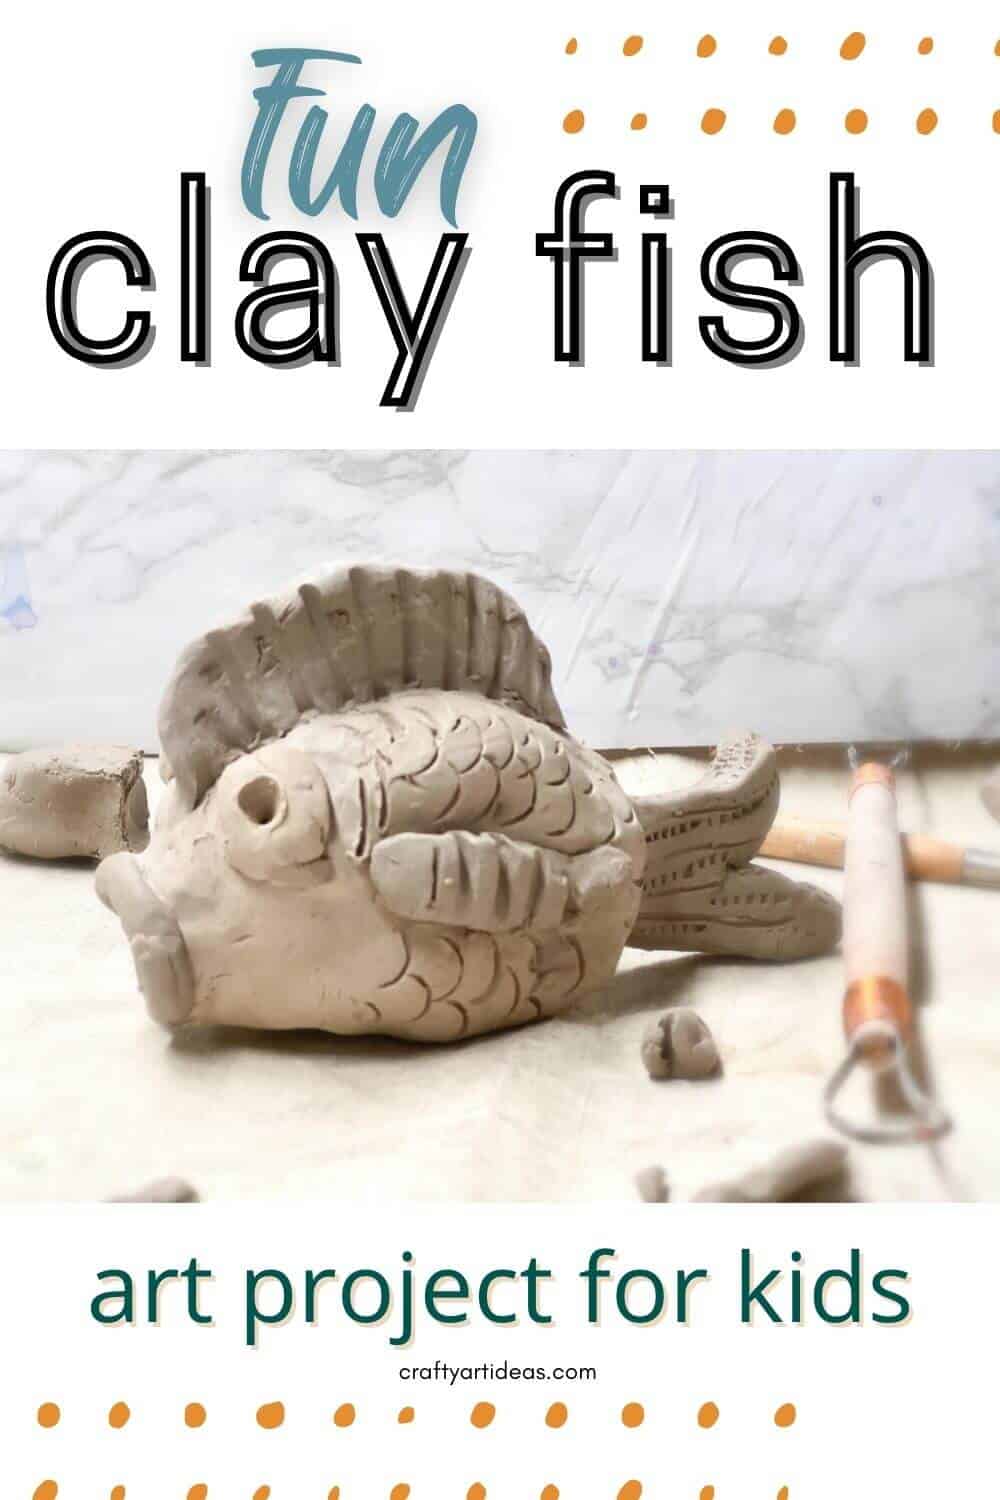 How To Build A Clay Fish For Kids - Crafty Art Ideas